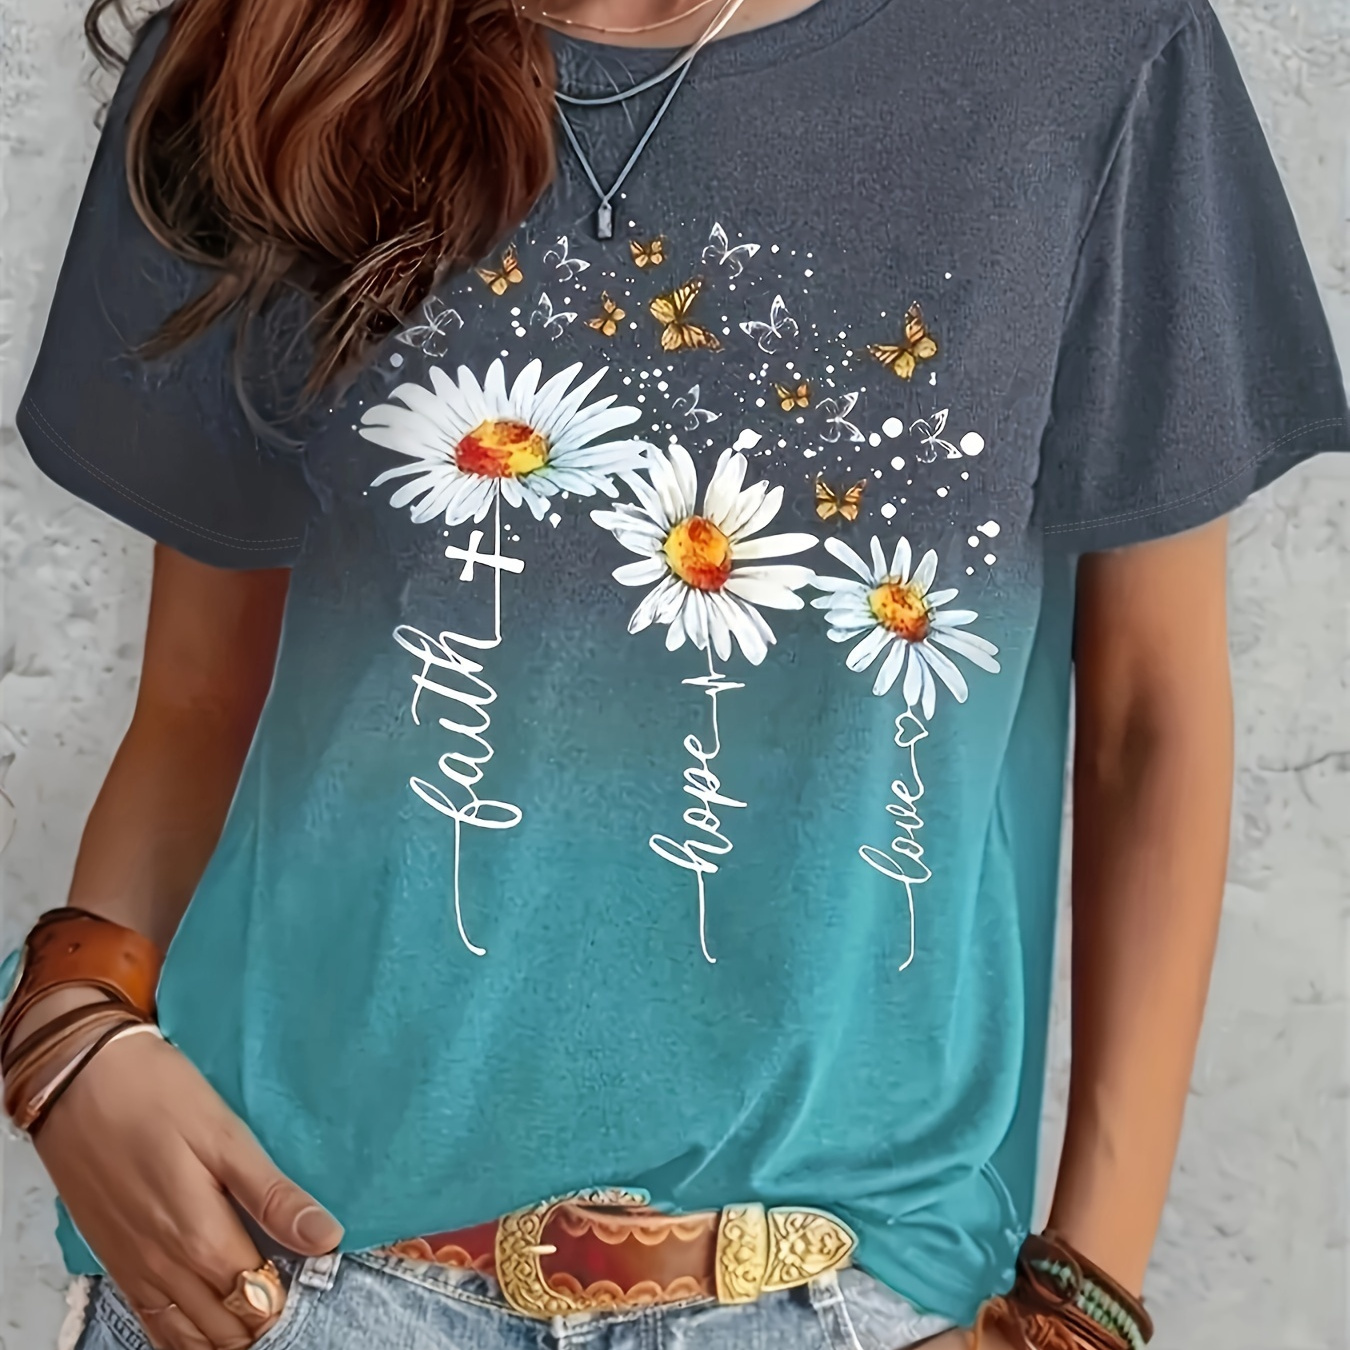 

T-shirt With Floral And Butterfly Print In Larger Sizes, A Comfortable Short-sleeved Top With A Round Neckline For The Spring And Summer Season, Clothing For Women In Larger Sizes